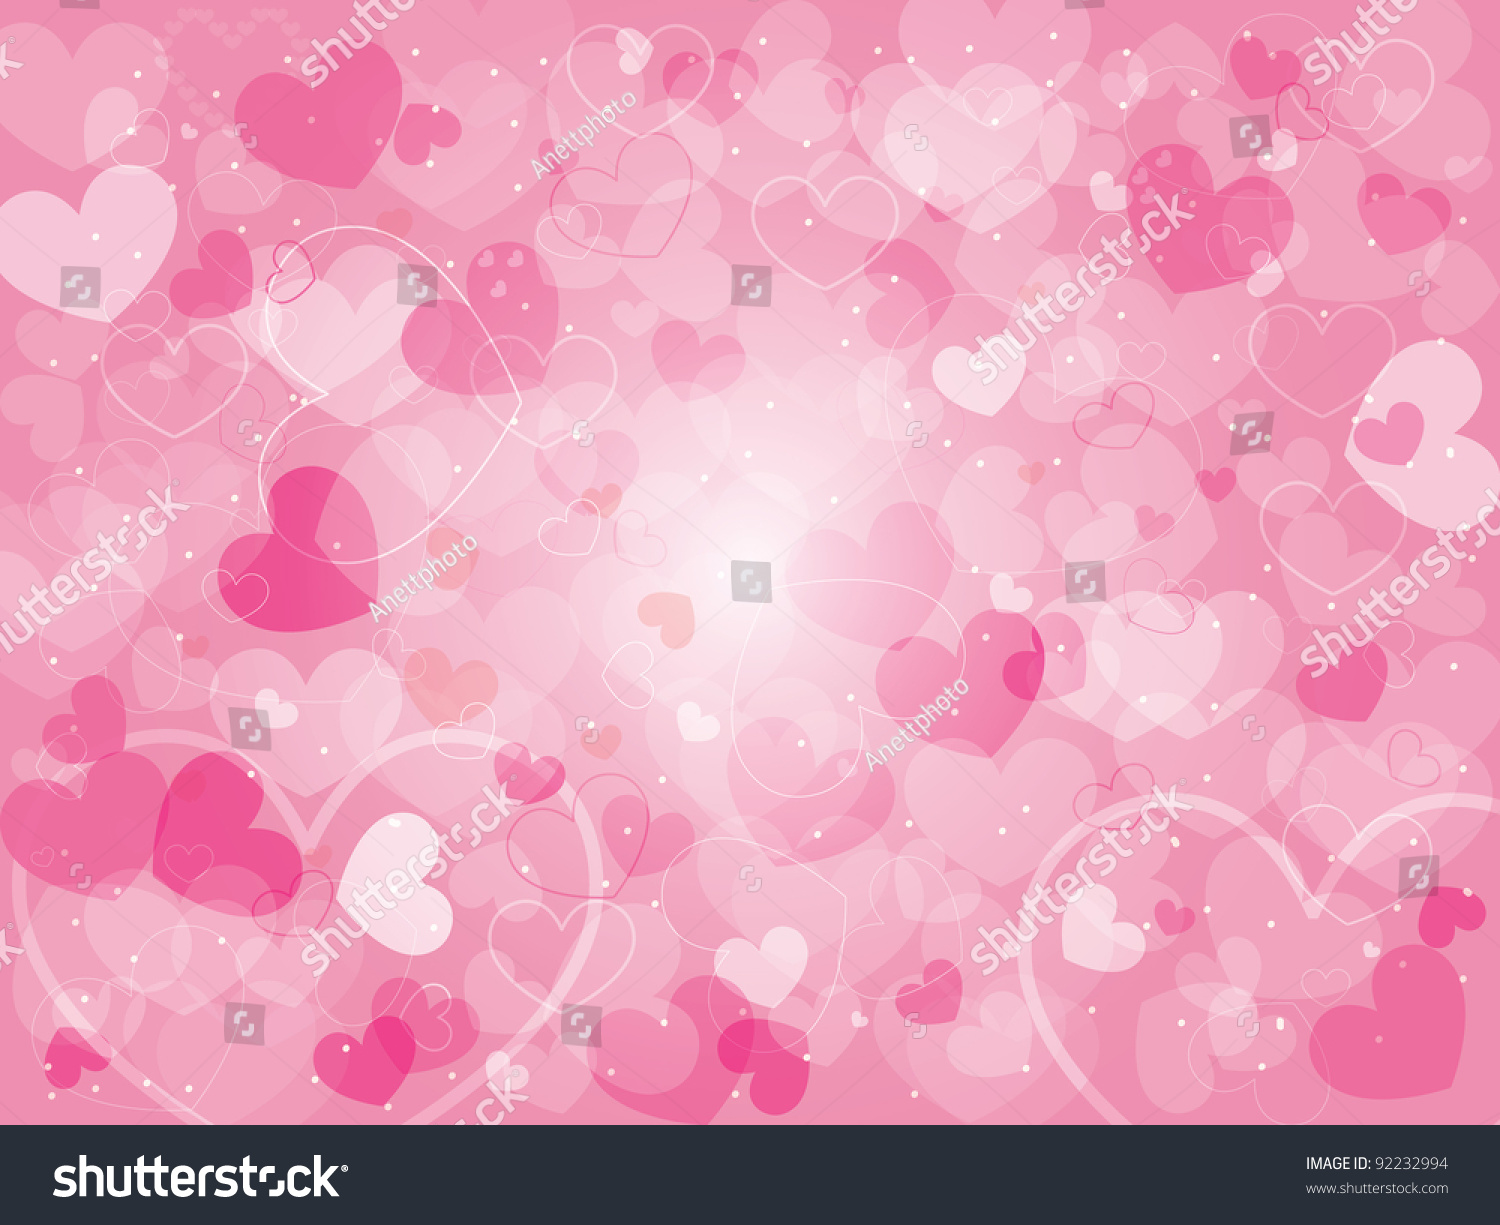 Valentine S Day Background With Hearts Stock Vector